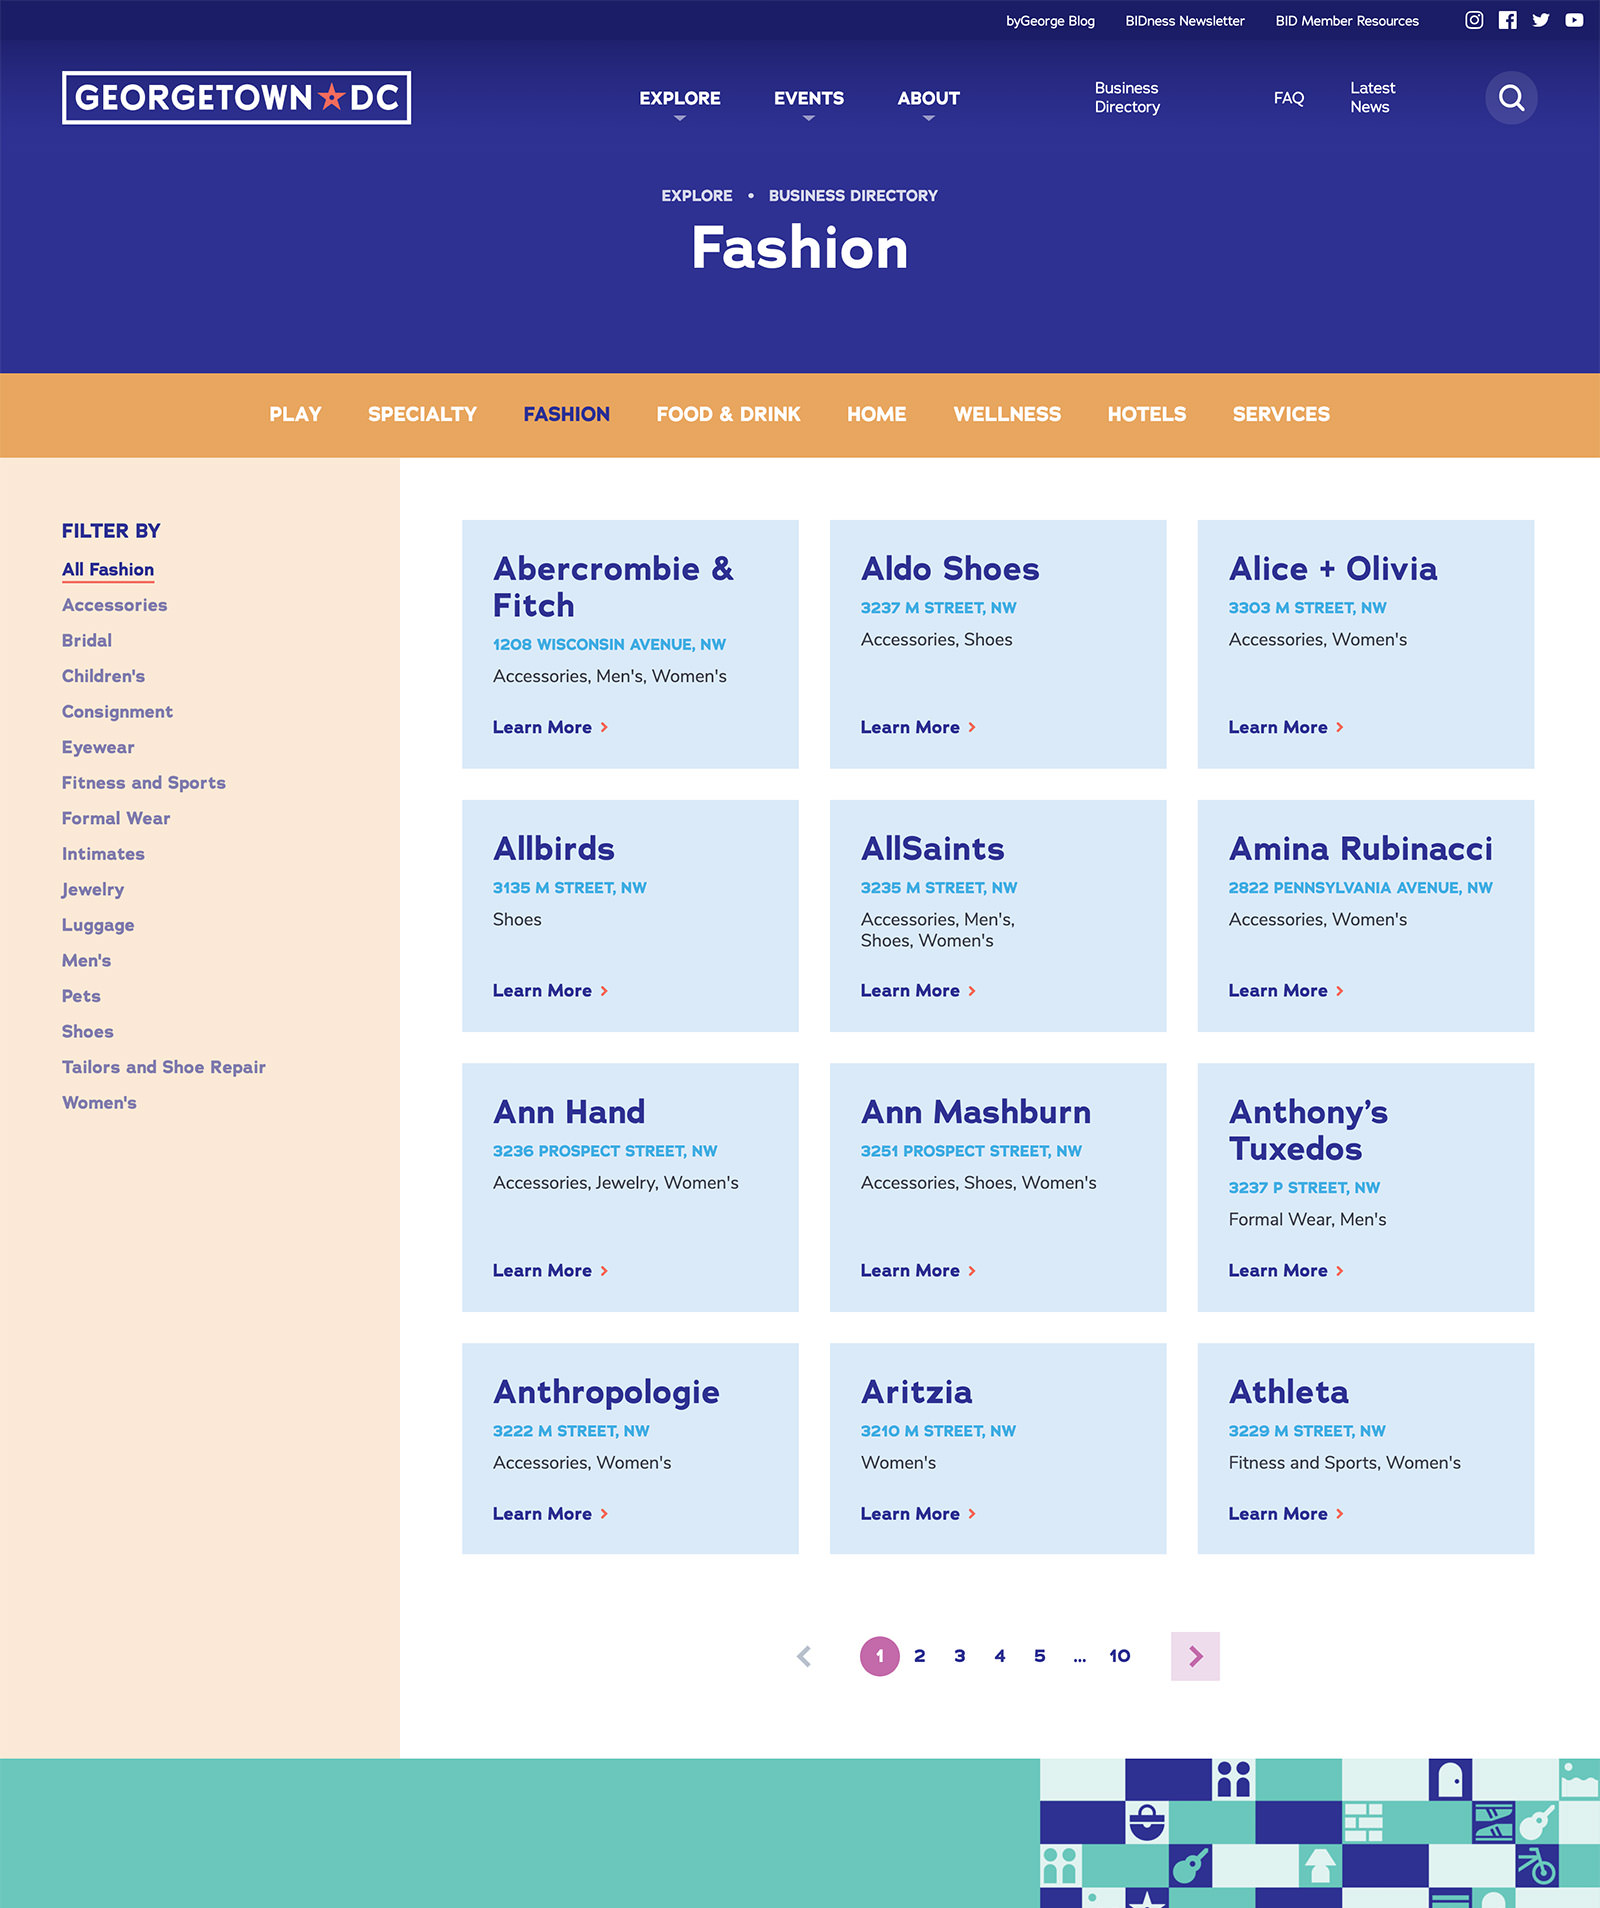 Business directory design for the Georgetown site